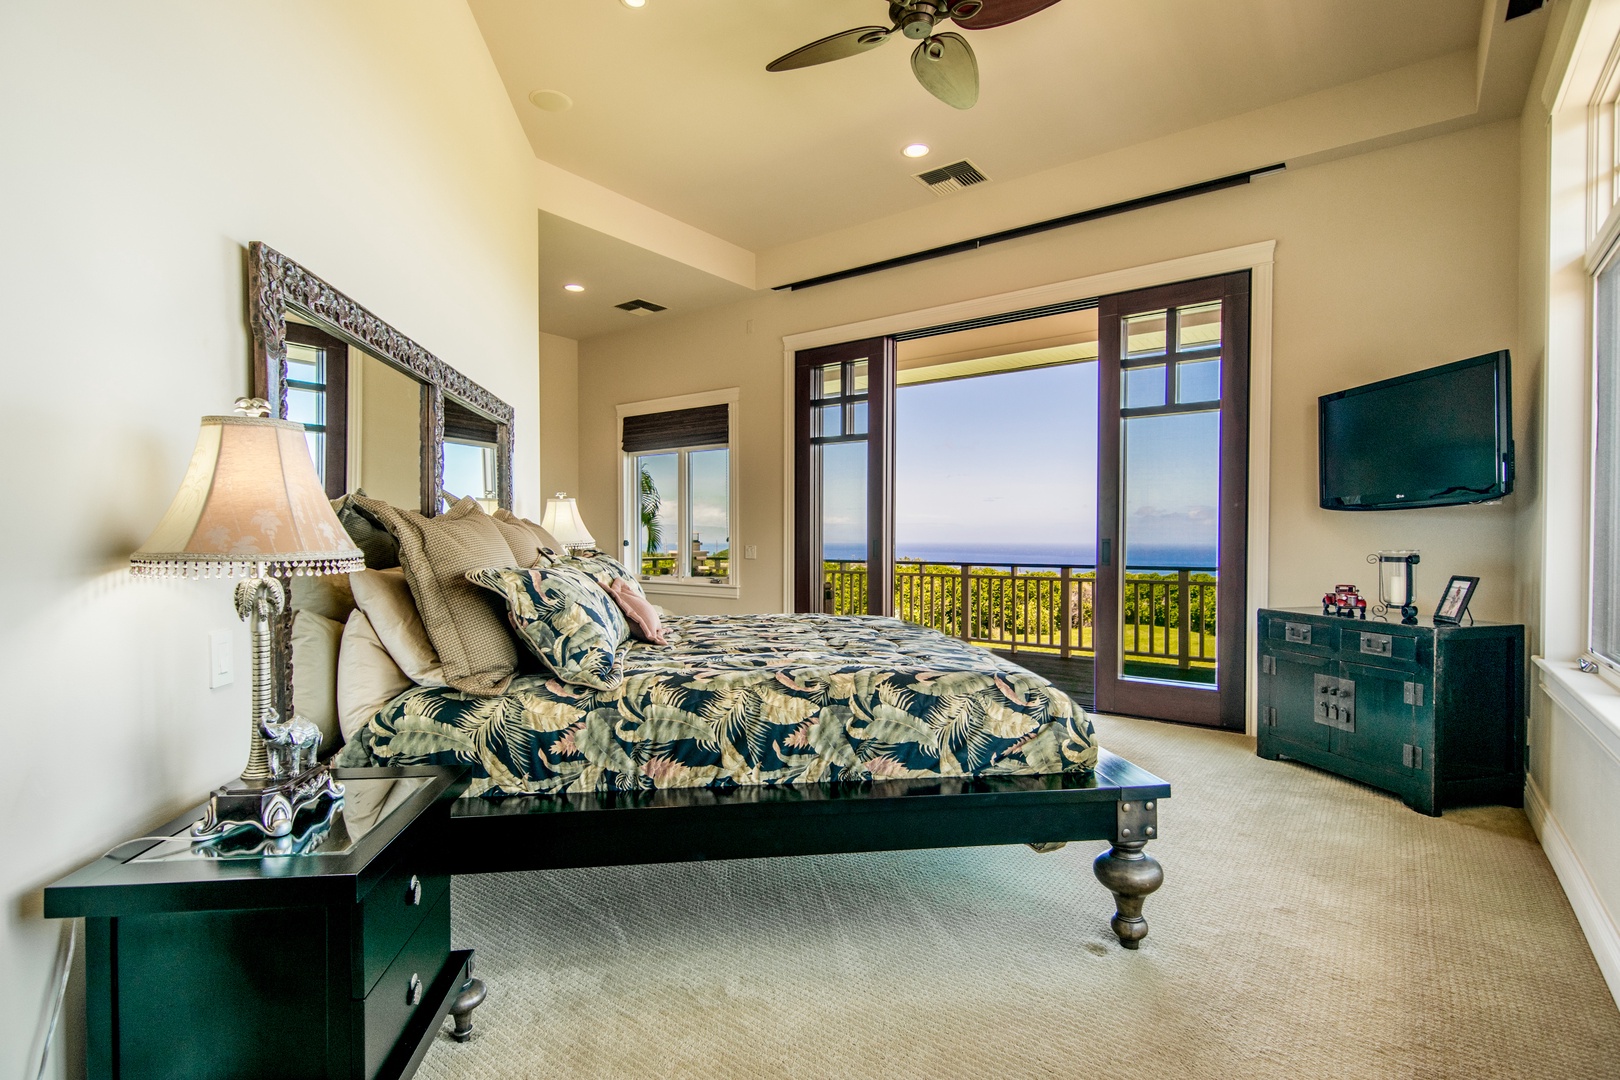 Lahaina Vacation Rentals, Rainbow Hale Estate* - Primary Bedroom with Full Lanai Access and Full Doors to Enjoy the Maui Ocean Trade Winds With Custom Decor and Furnishings